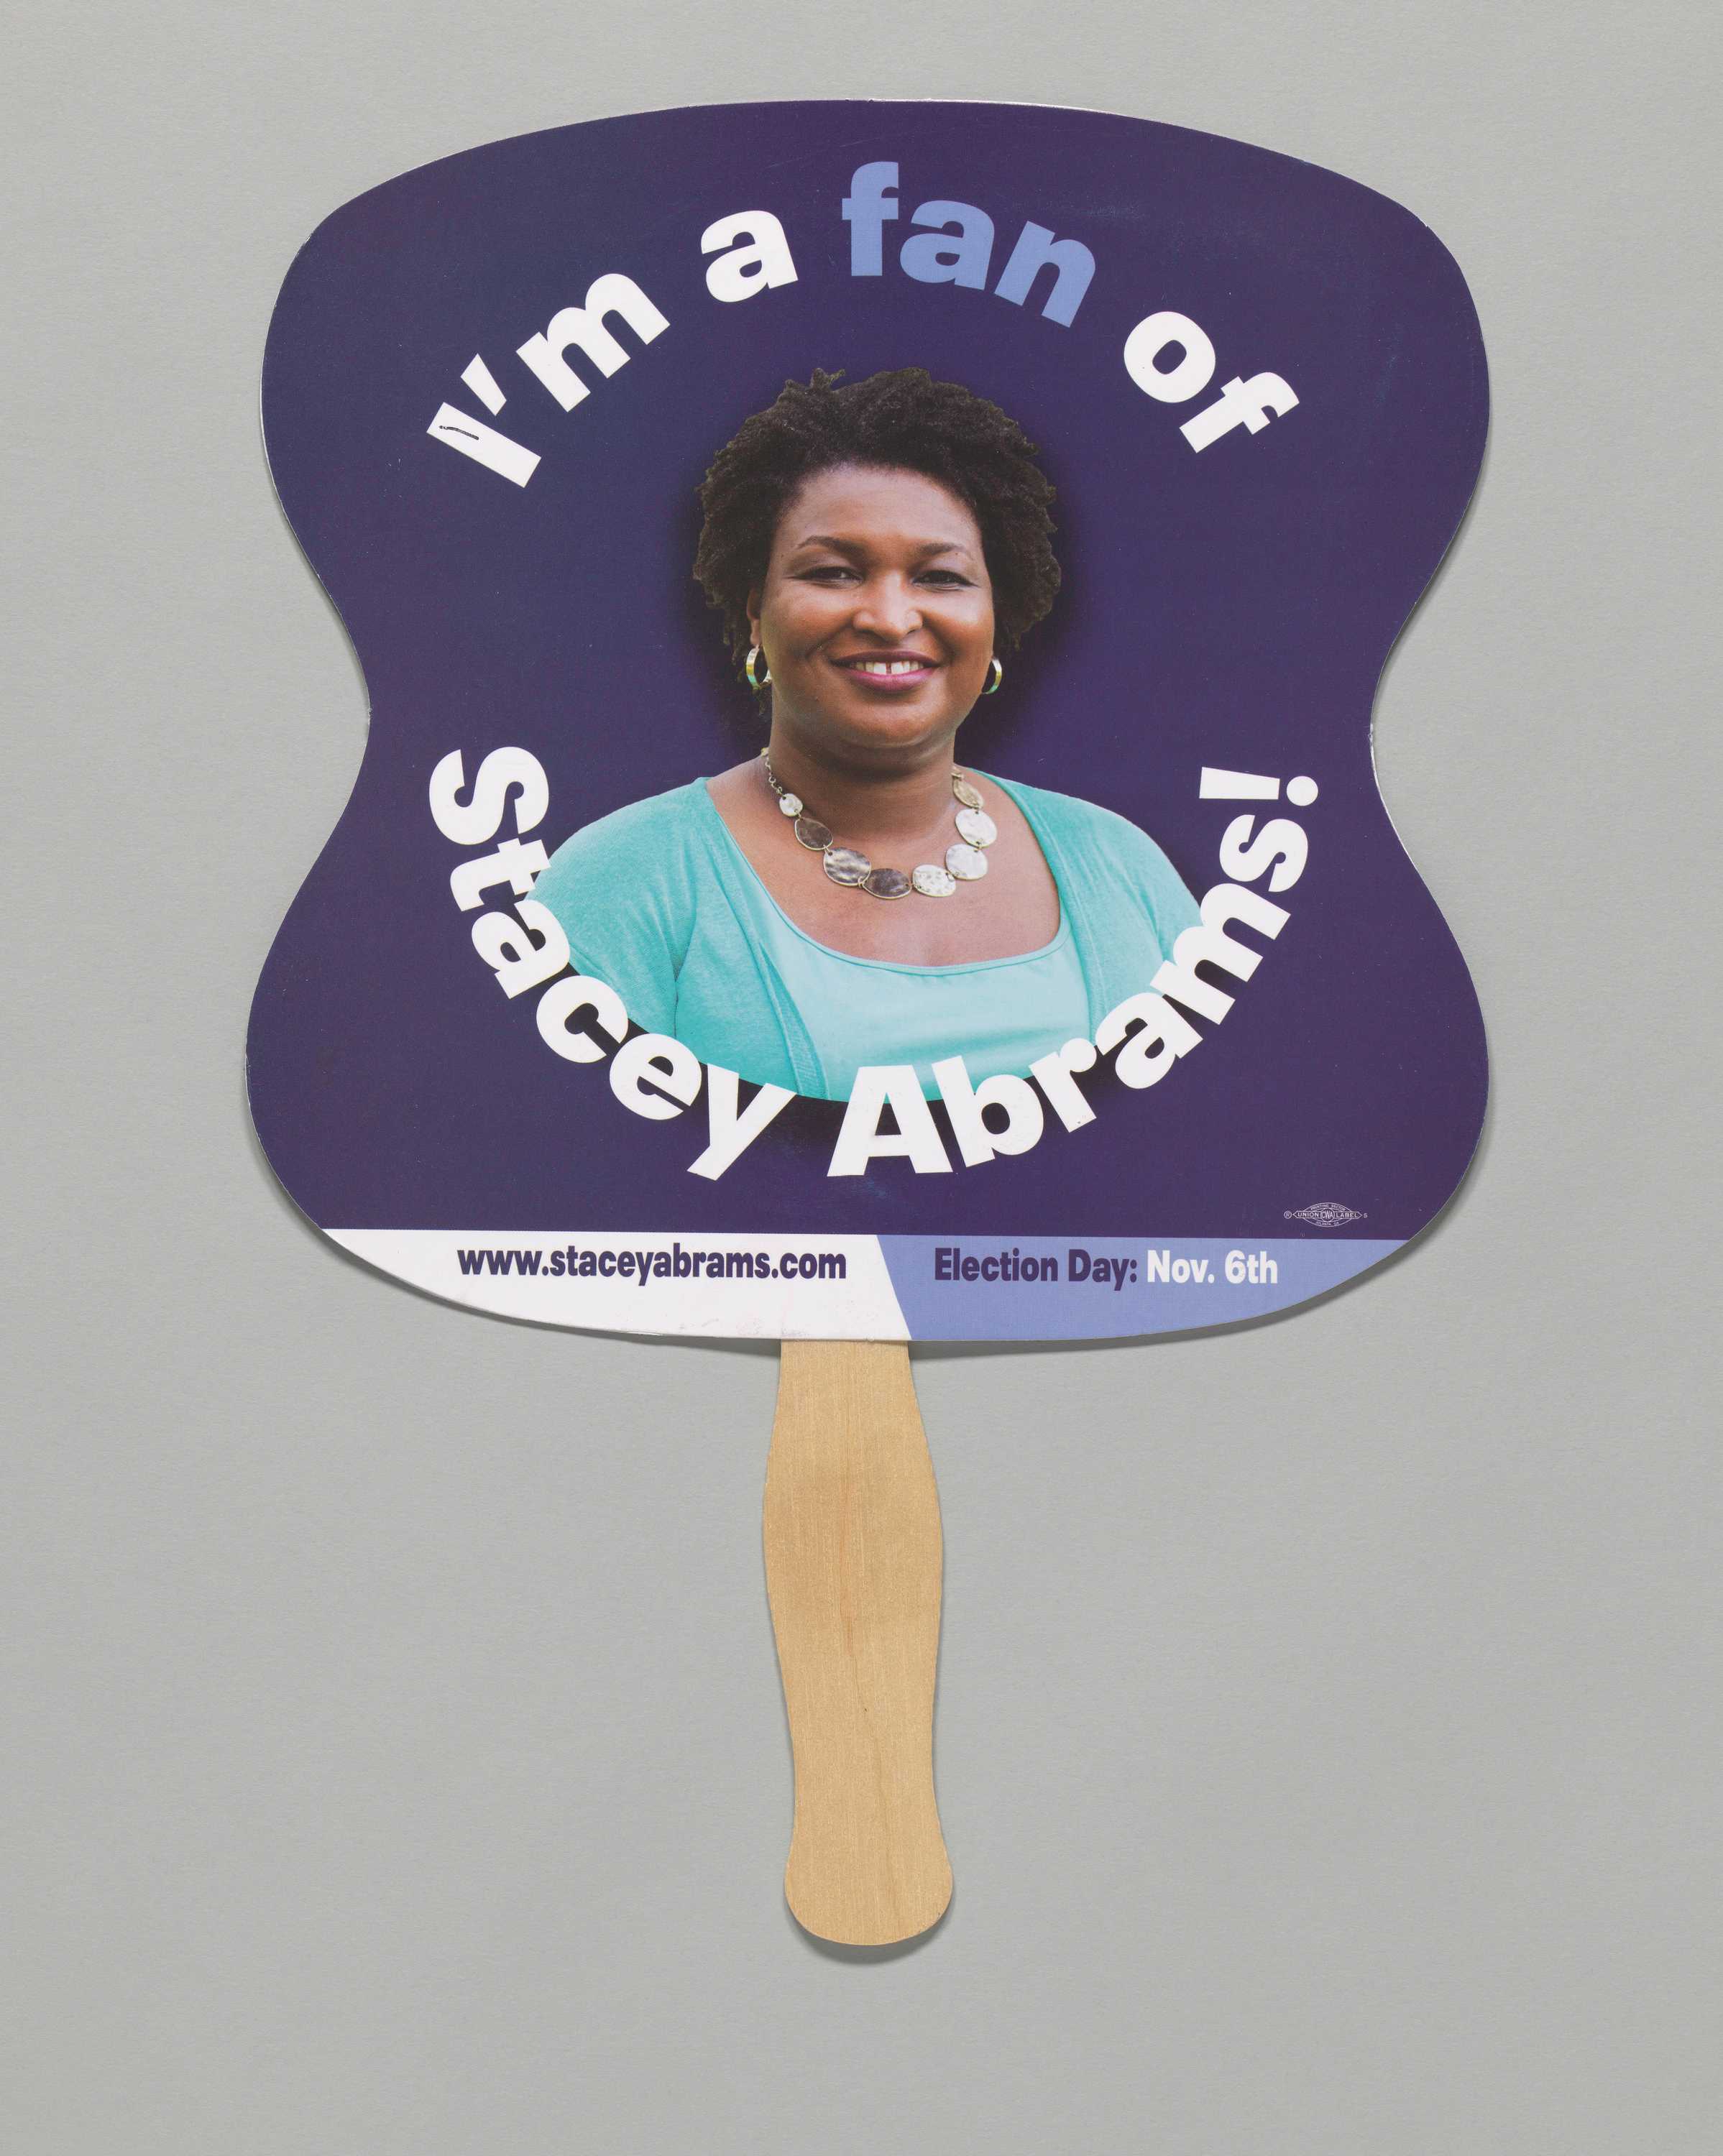 A dark blue paper fan from the Stacey Abrams 2018 Georgia gubernatorial campaign, mounted on a flat wooden handle.